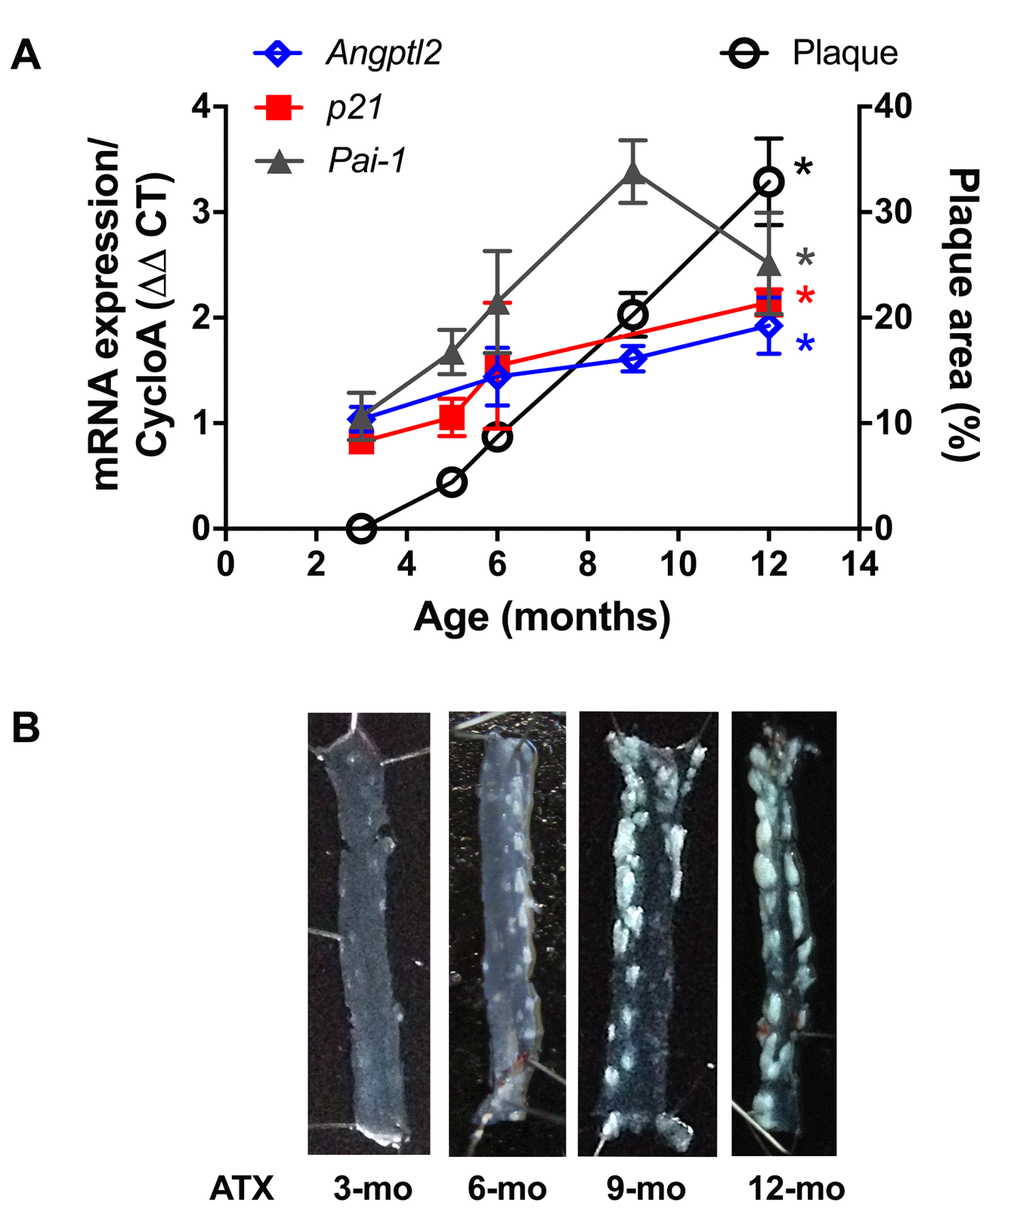 Age-dependent increase of senescence-associated p21, Pai-1 and angptl2 expressions in the native endothelium parallels plaque growth in the aorta. (A) mRNA expression of indicated genes was quantified in the native aortic endothelium of 3-mo (n=4), 5-mo (n=4), 6-mo (n=4) and 12-mo (n=4) control ATX mice. The average level of gene expression in 3-mo ATX mice was arbitrarily set at 1. Plaque area was quantified from longitudinally open thoracic aortas of 3-mo (n=7), 5-mo (n=5), 6-mo (n=7), 9-mo (n=12) and 12-mo (n=4) ATX mice. Data are expressed as mean±SEM. *: pvs. 3-mo ATX mice. (B) Representative pictures of age-related increase in atherosclerotic plaque in 3-, 6-, 9- and 12-mo ATX mice.